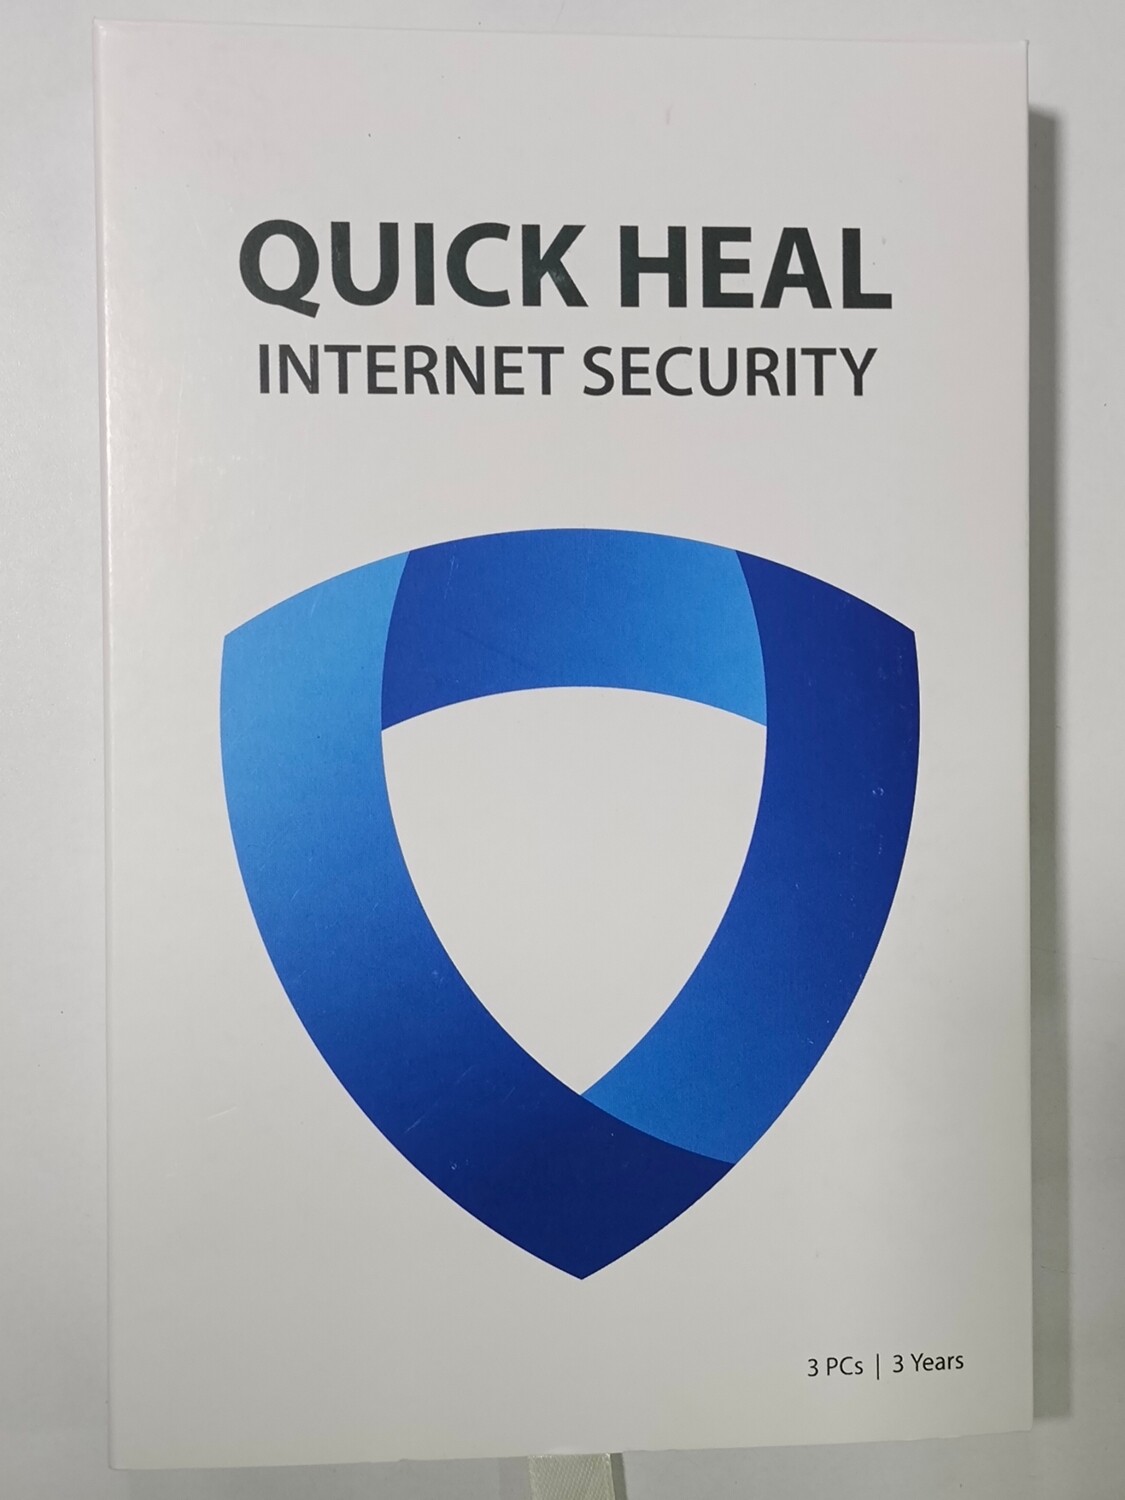 New, 3 User, 3 Year, Quick Heal Internet Security